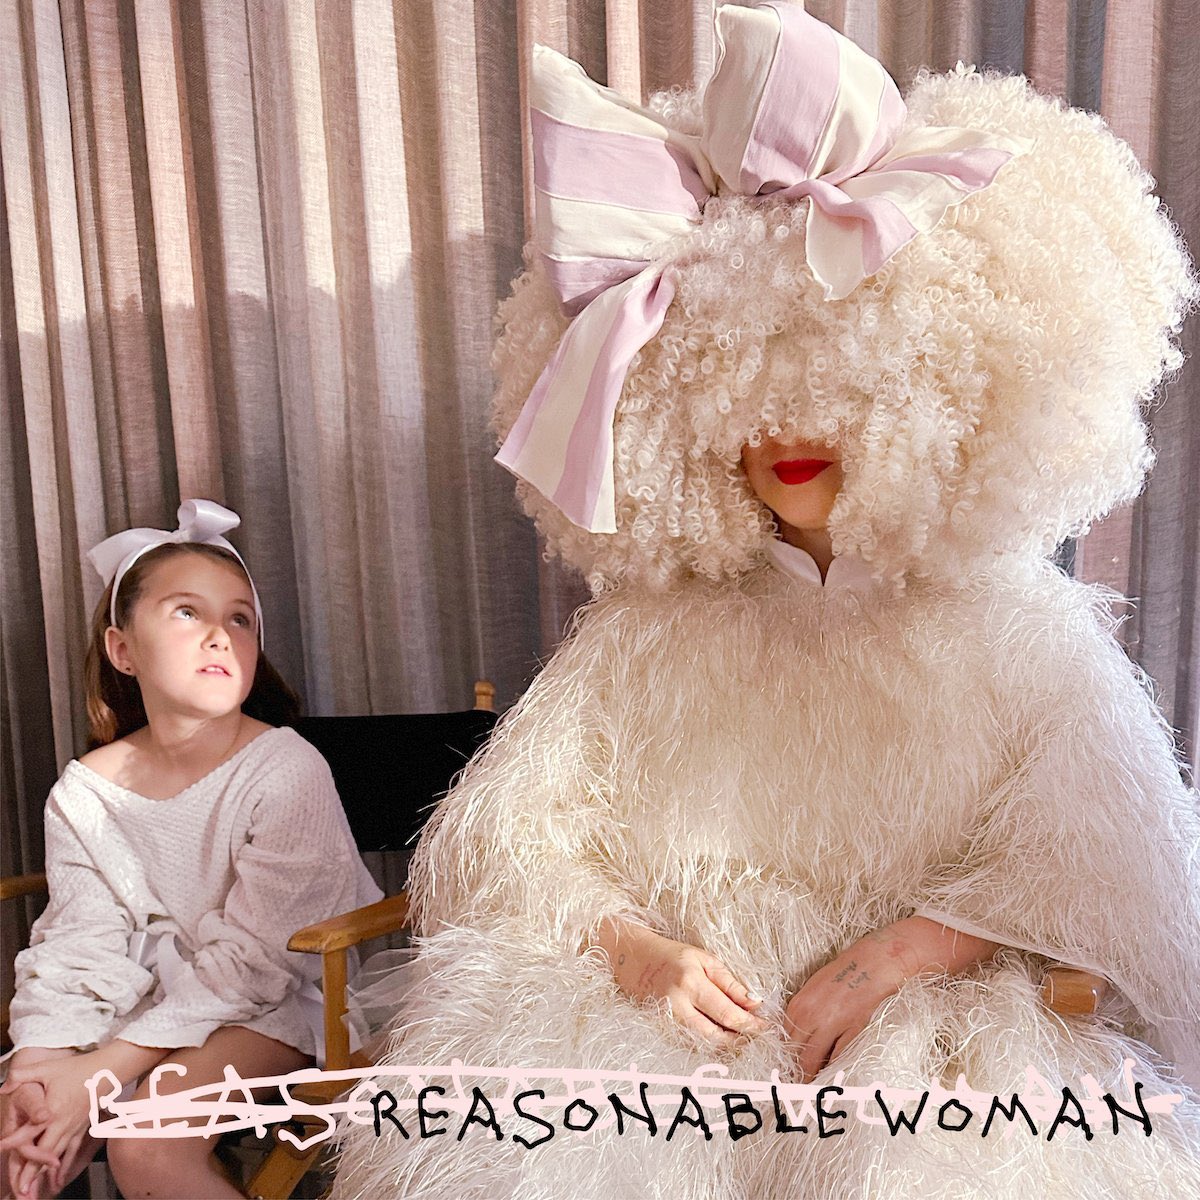 #ReasonableWoman by @Sia reaches number 2 on the worldwide iTunes charts!